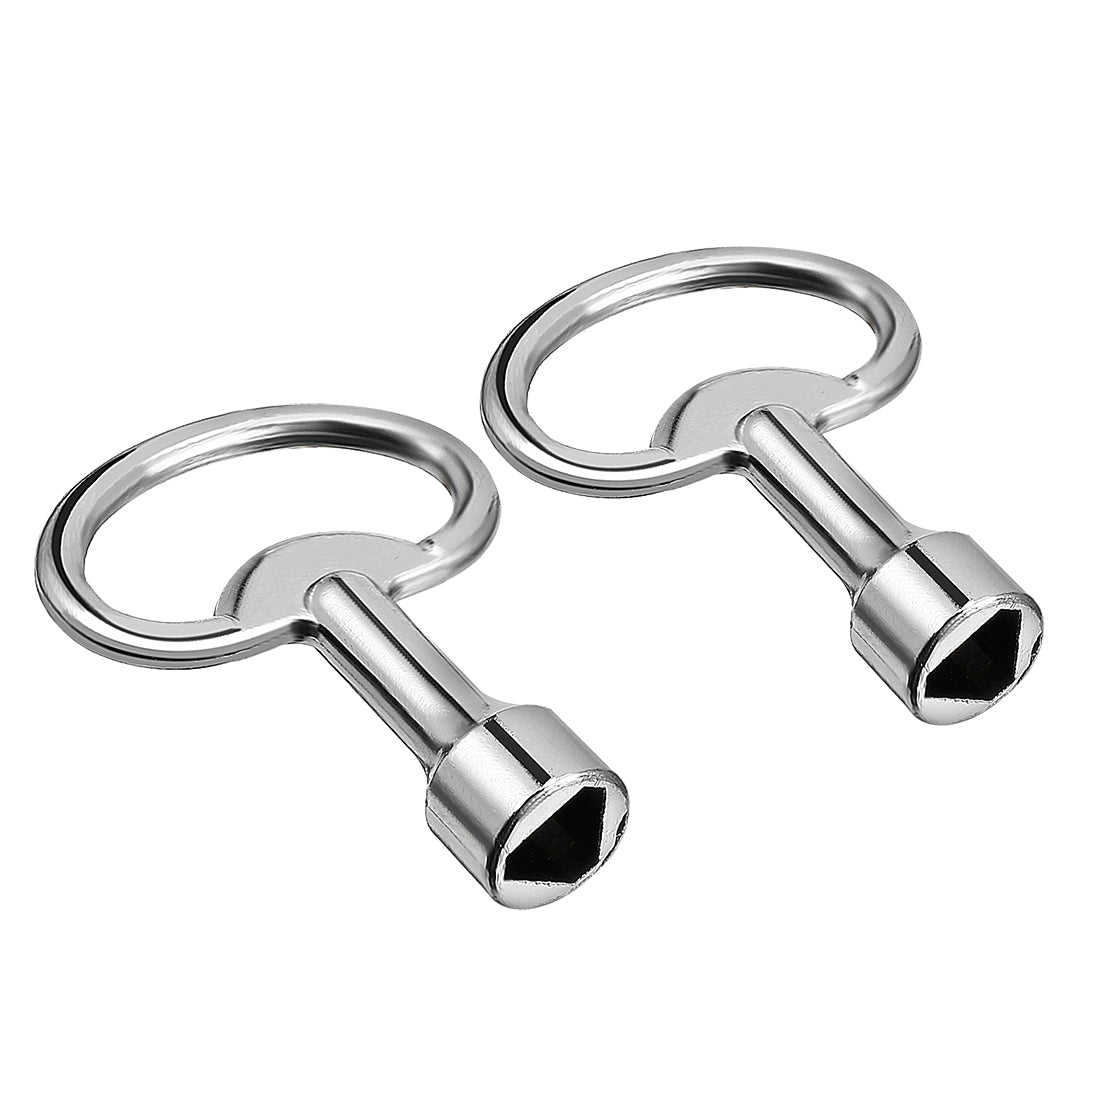 uxcell Uxcell 2pcs 53mm Length 13mmx8mmx2mm Zinc Alloy Triangle Electrical Cabinet Key